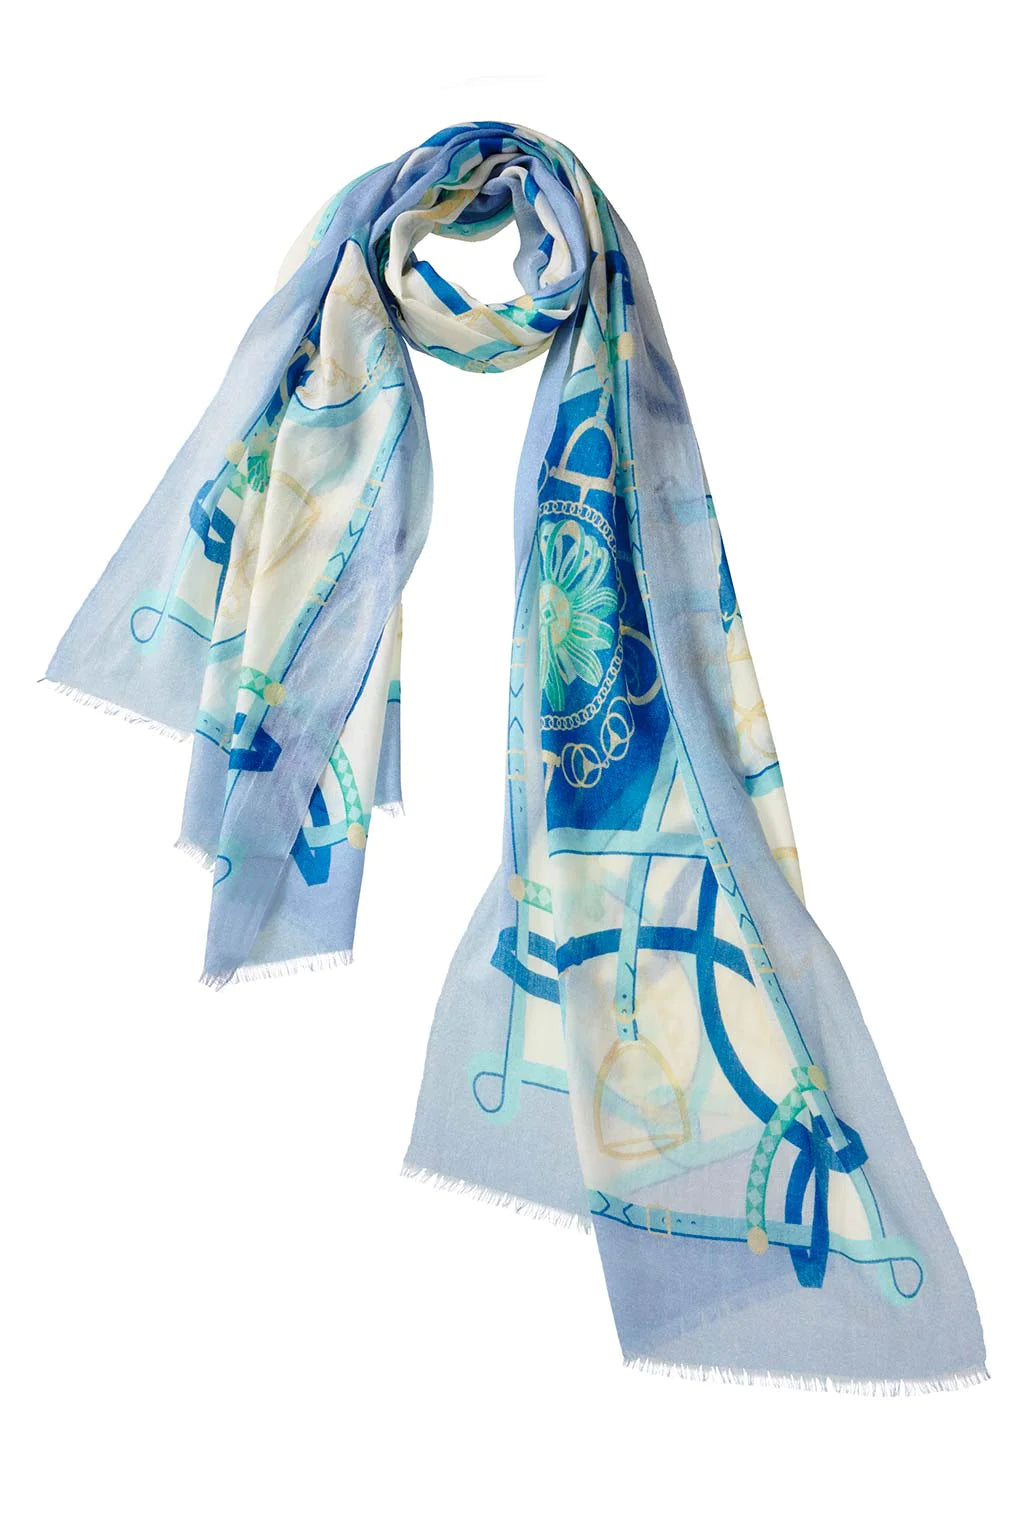 Turquoise and white patterned scarf